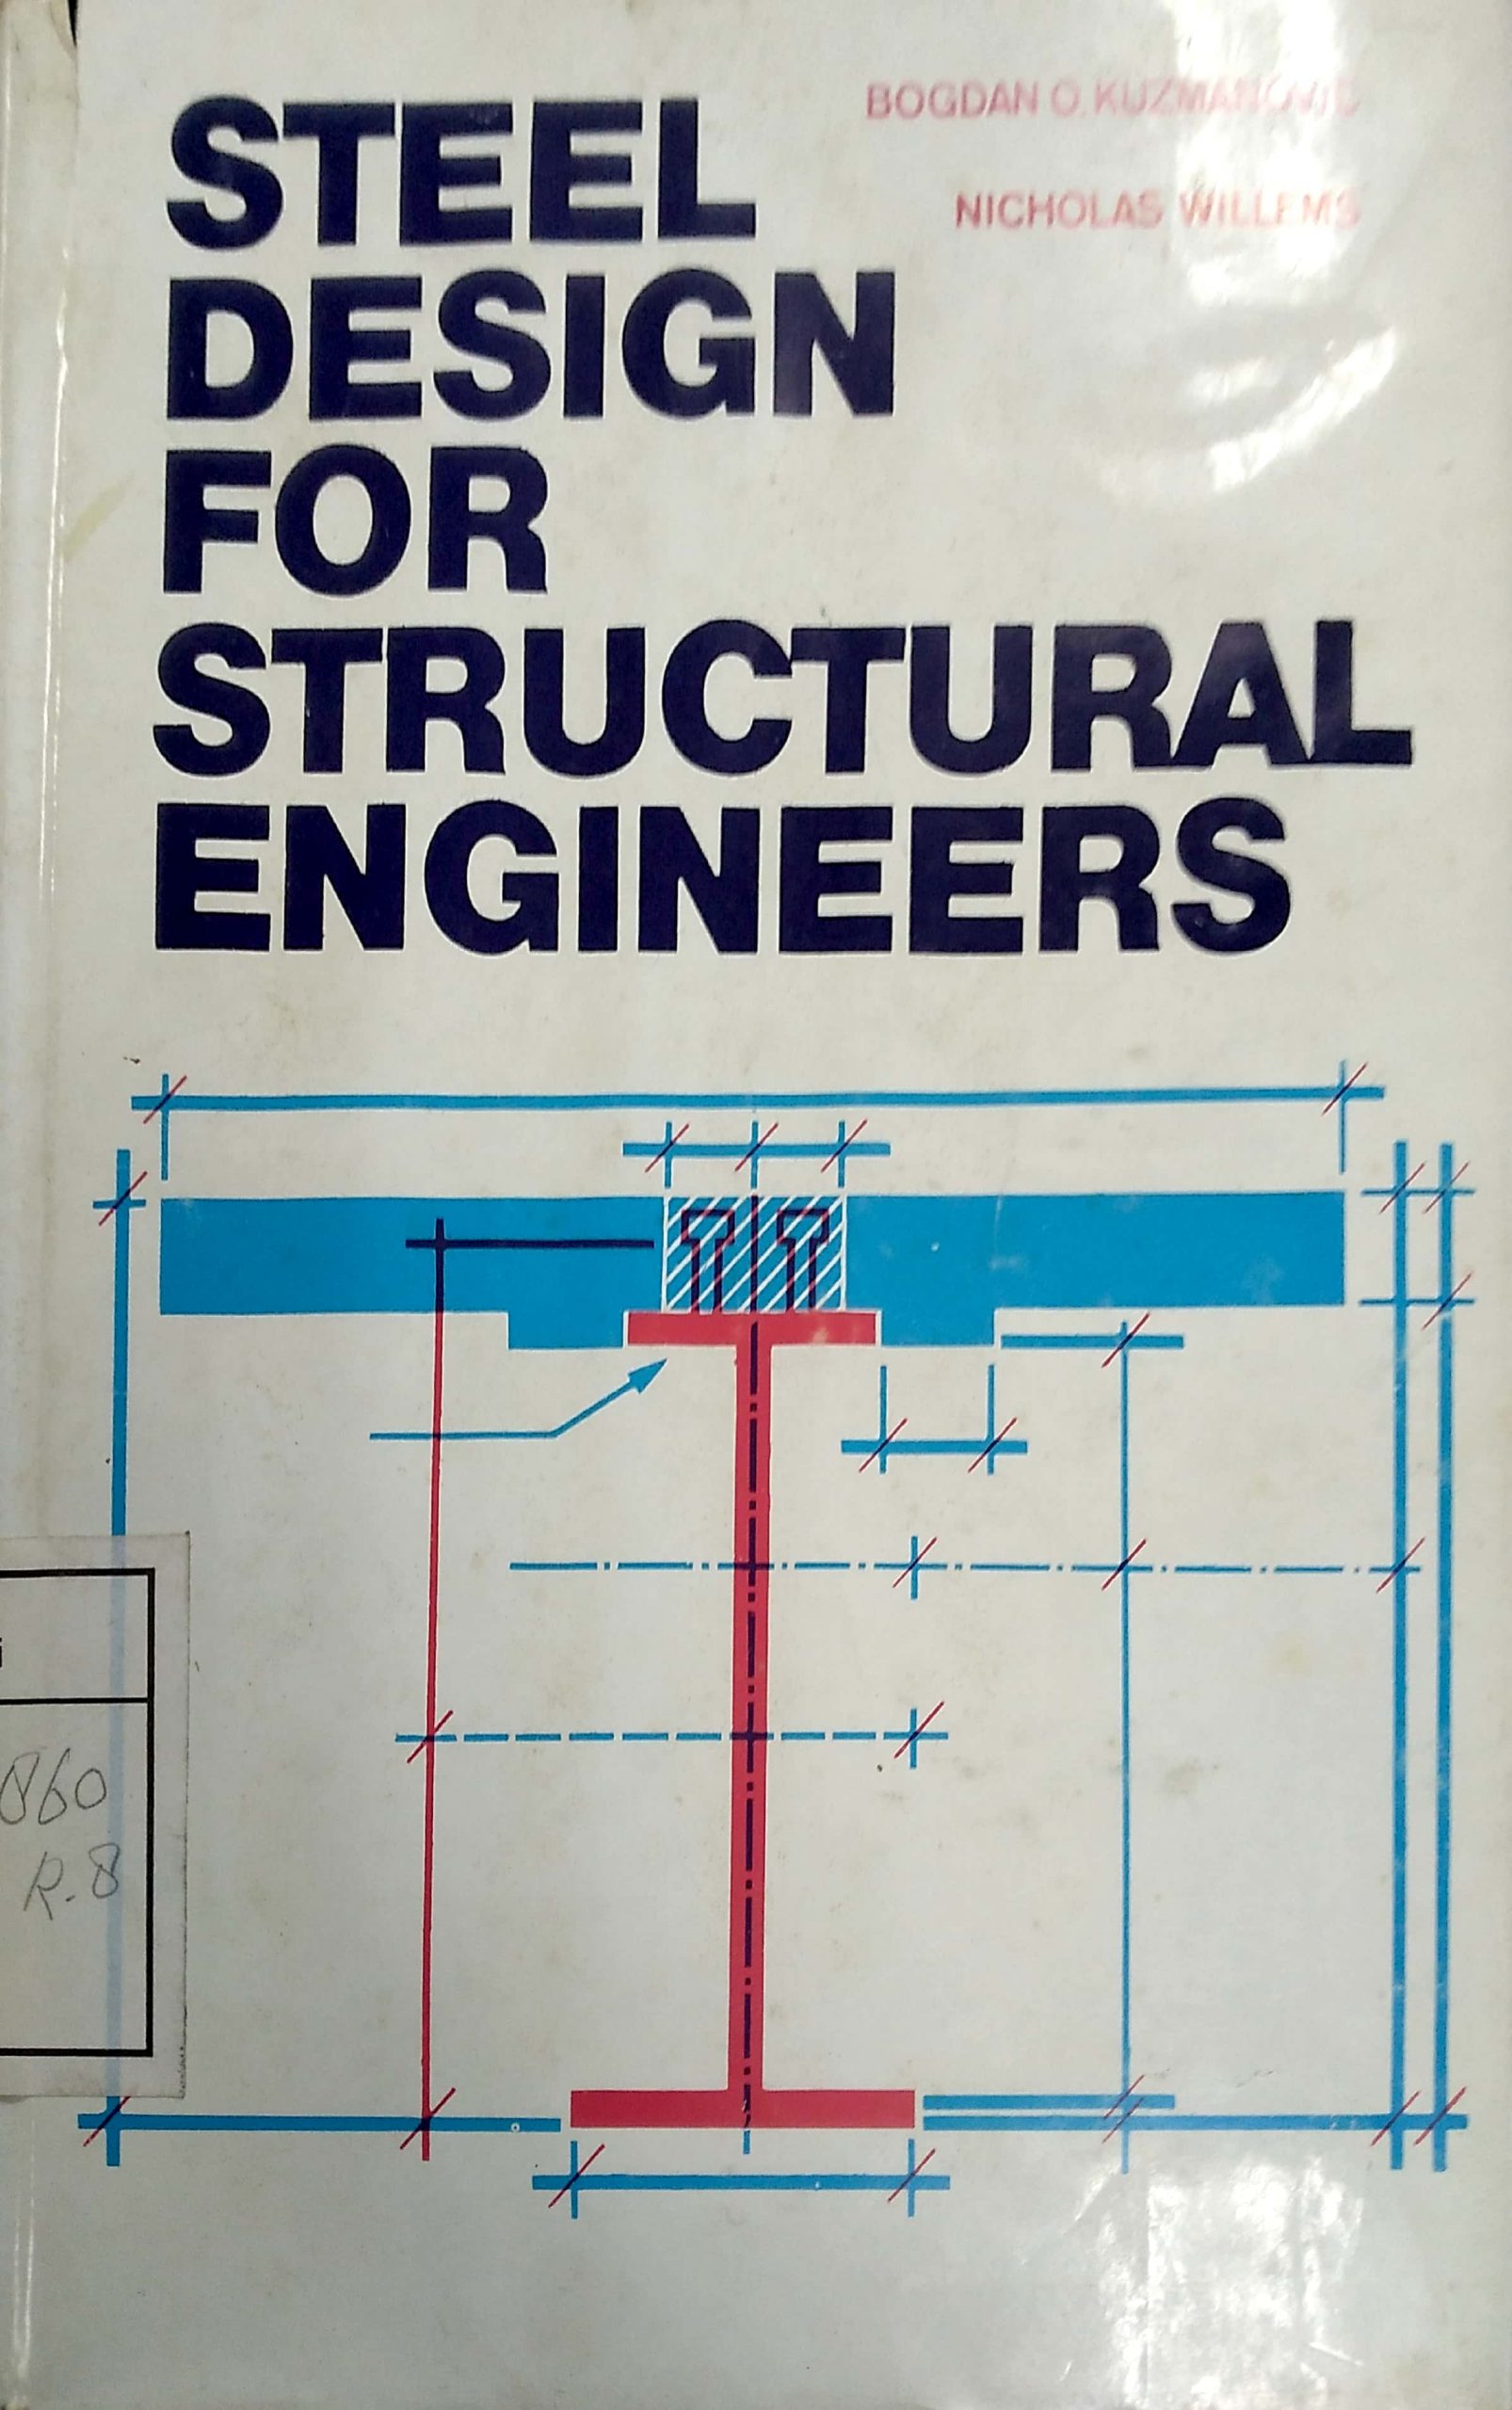 STEEL DESIGN FOR STRUCTURAL ENGINEERS